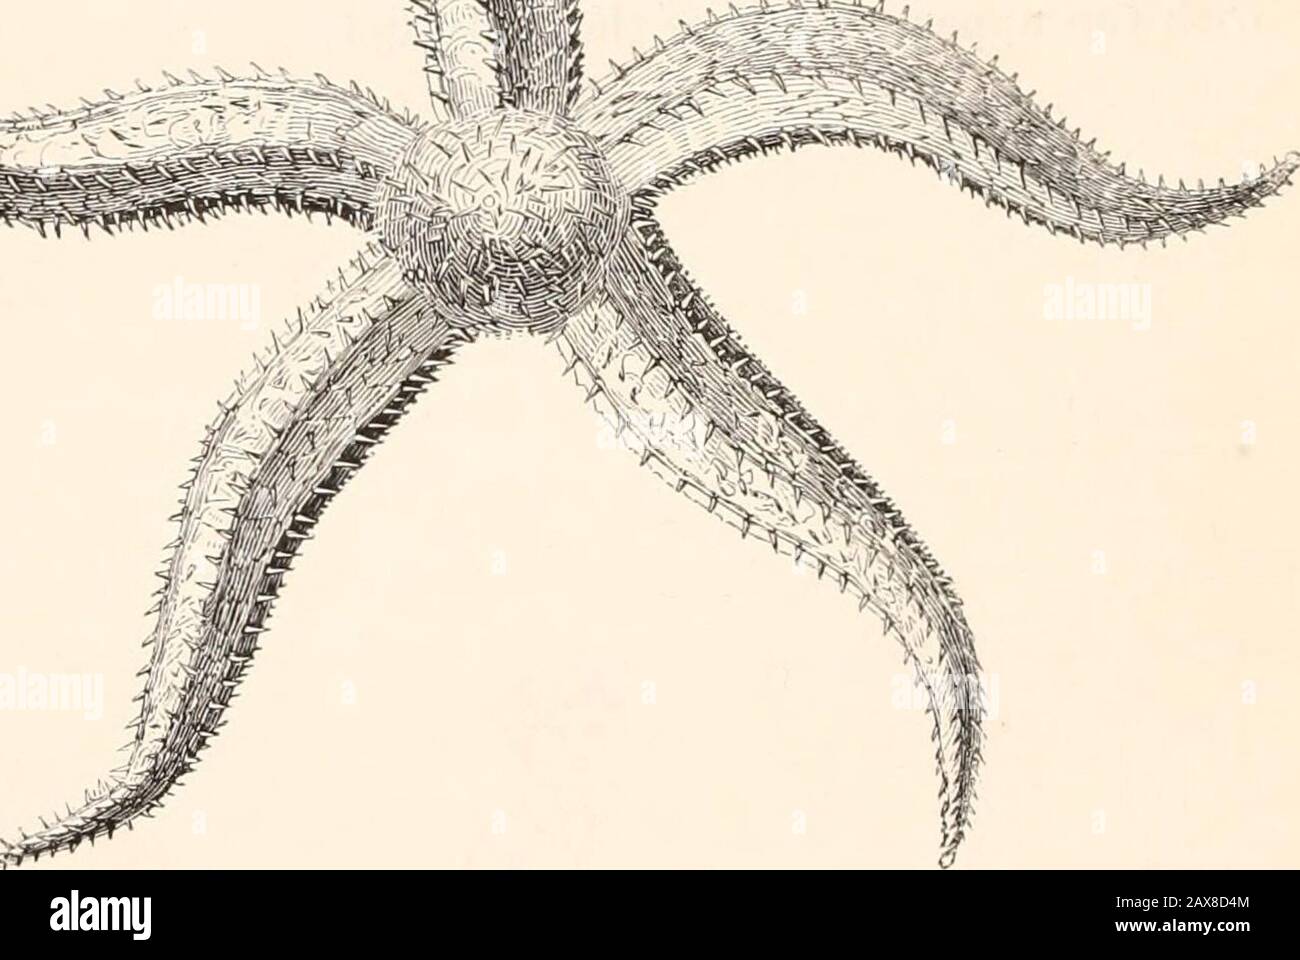 A history of British star-fishes, and other animals of the class Echinodermata . Ui=A.. Genus Uraster. Agassiz. Generic Character.—Body stellate, few-rayed ; rays rounded, spinous ; avenuesbordered by three sets of spines ; suckers quadriserial. SPINY CROSS-FISH. Uraster glacialis. Lin. Ag. Specific Character.—Rays long, pentangular, the angles with large strongspines ; avenues regularly tapering. Astcrius glacialis, Linn. Lam. Anim. sans Vert. 1 Edit. II. p. 861, No. 26 ; 2 Edit. III. p. 248. Muller, Zool. Dan. Prod. 2838.Asterias echinophora, Della Chiagi, Mem. vol. II. p. 356. pi. xviii. f. Stock Photo